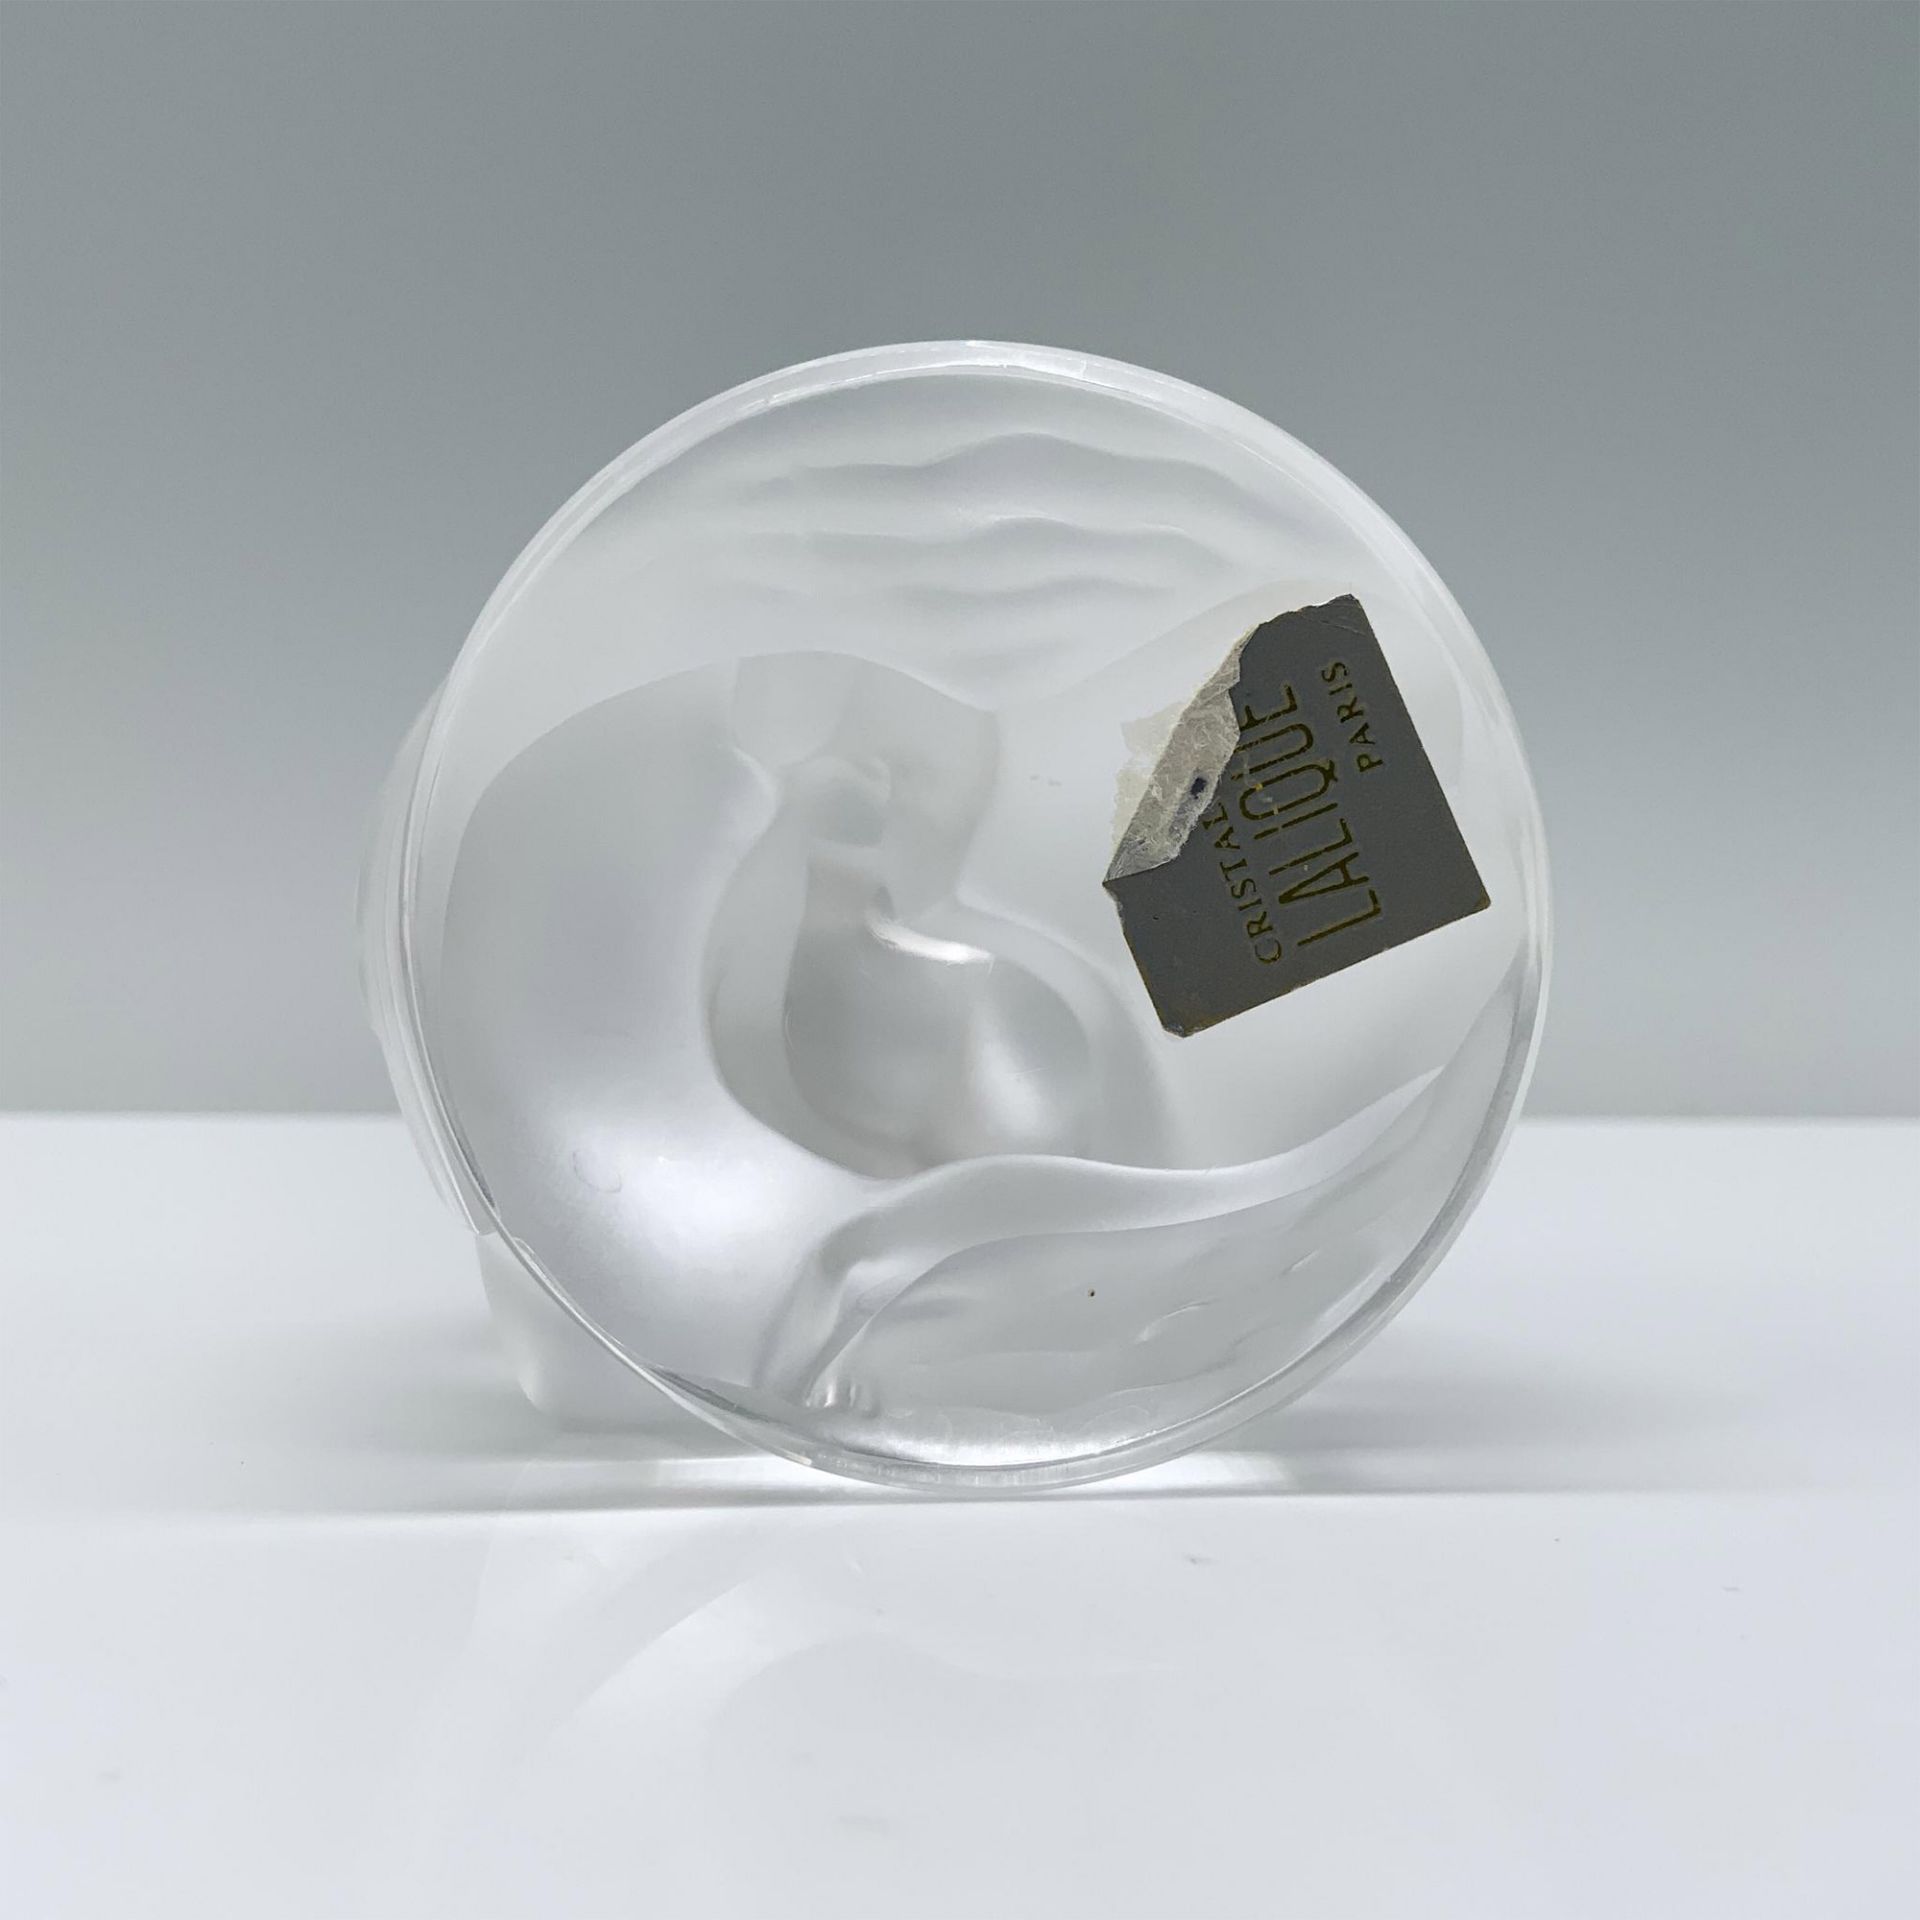 Lalique Crystal Figurine, Leda and the Swan - Image 3 of 3